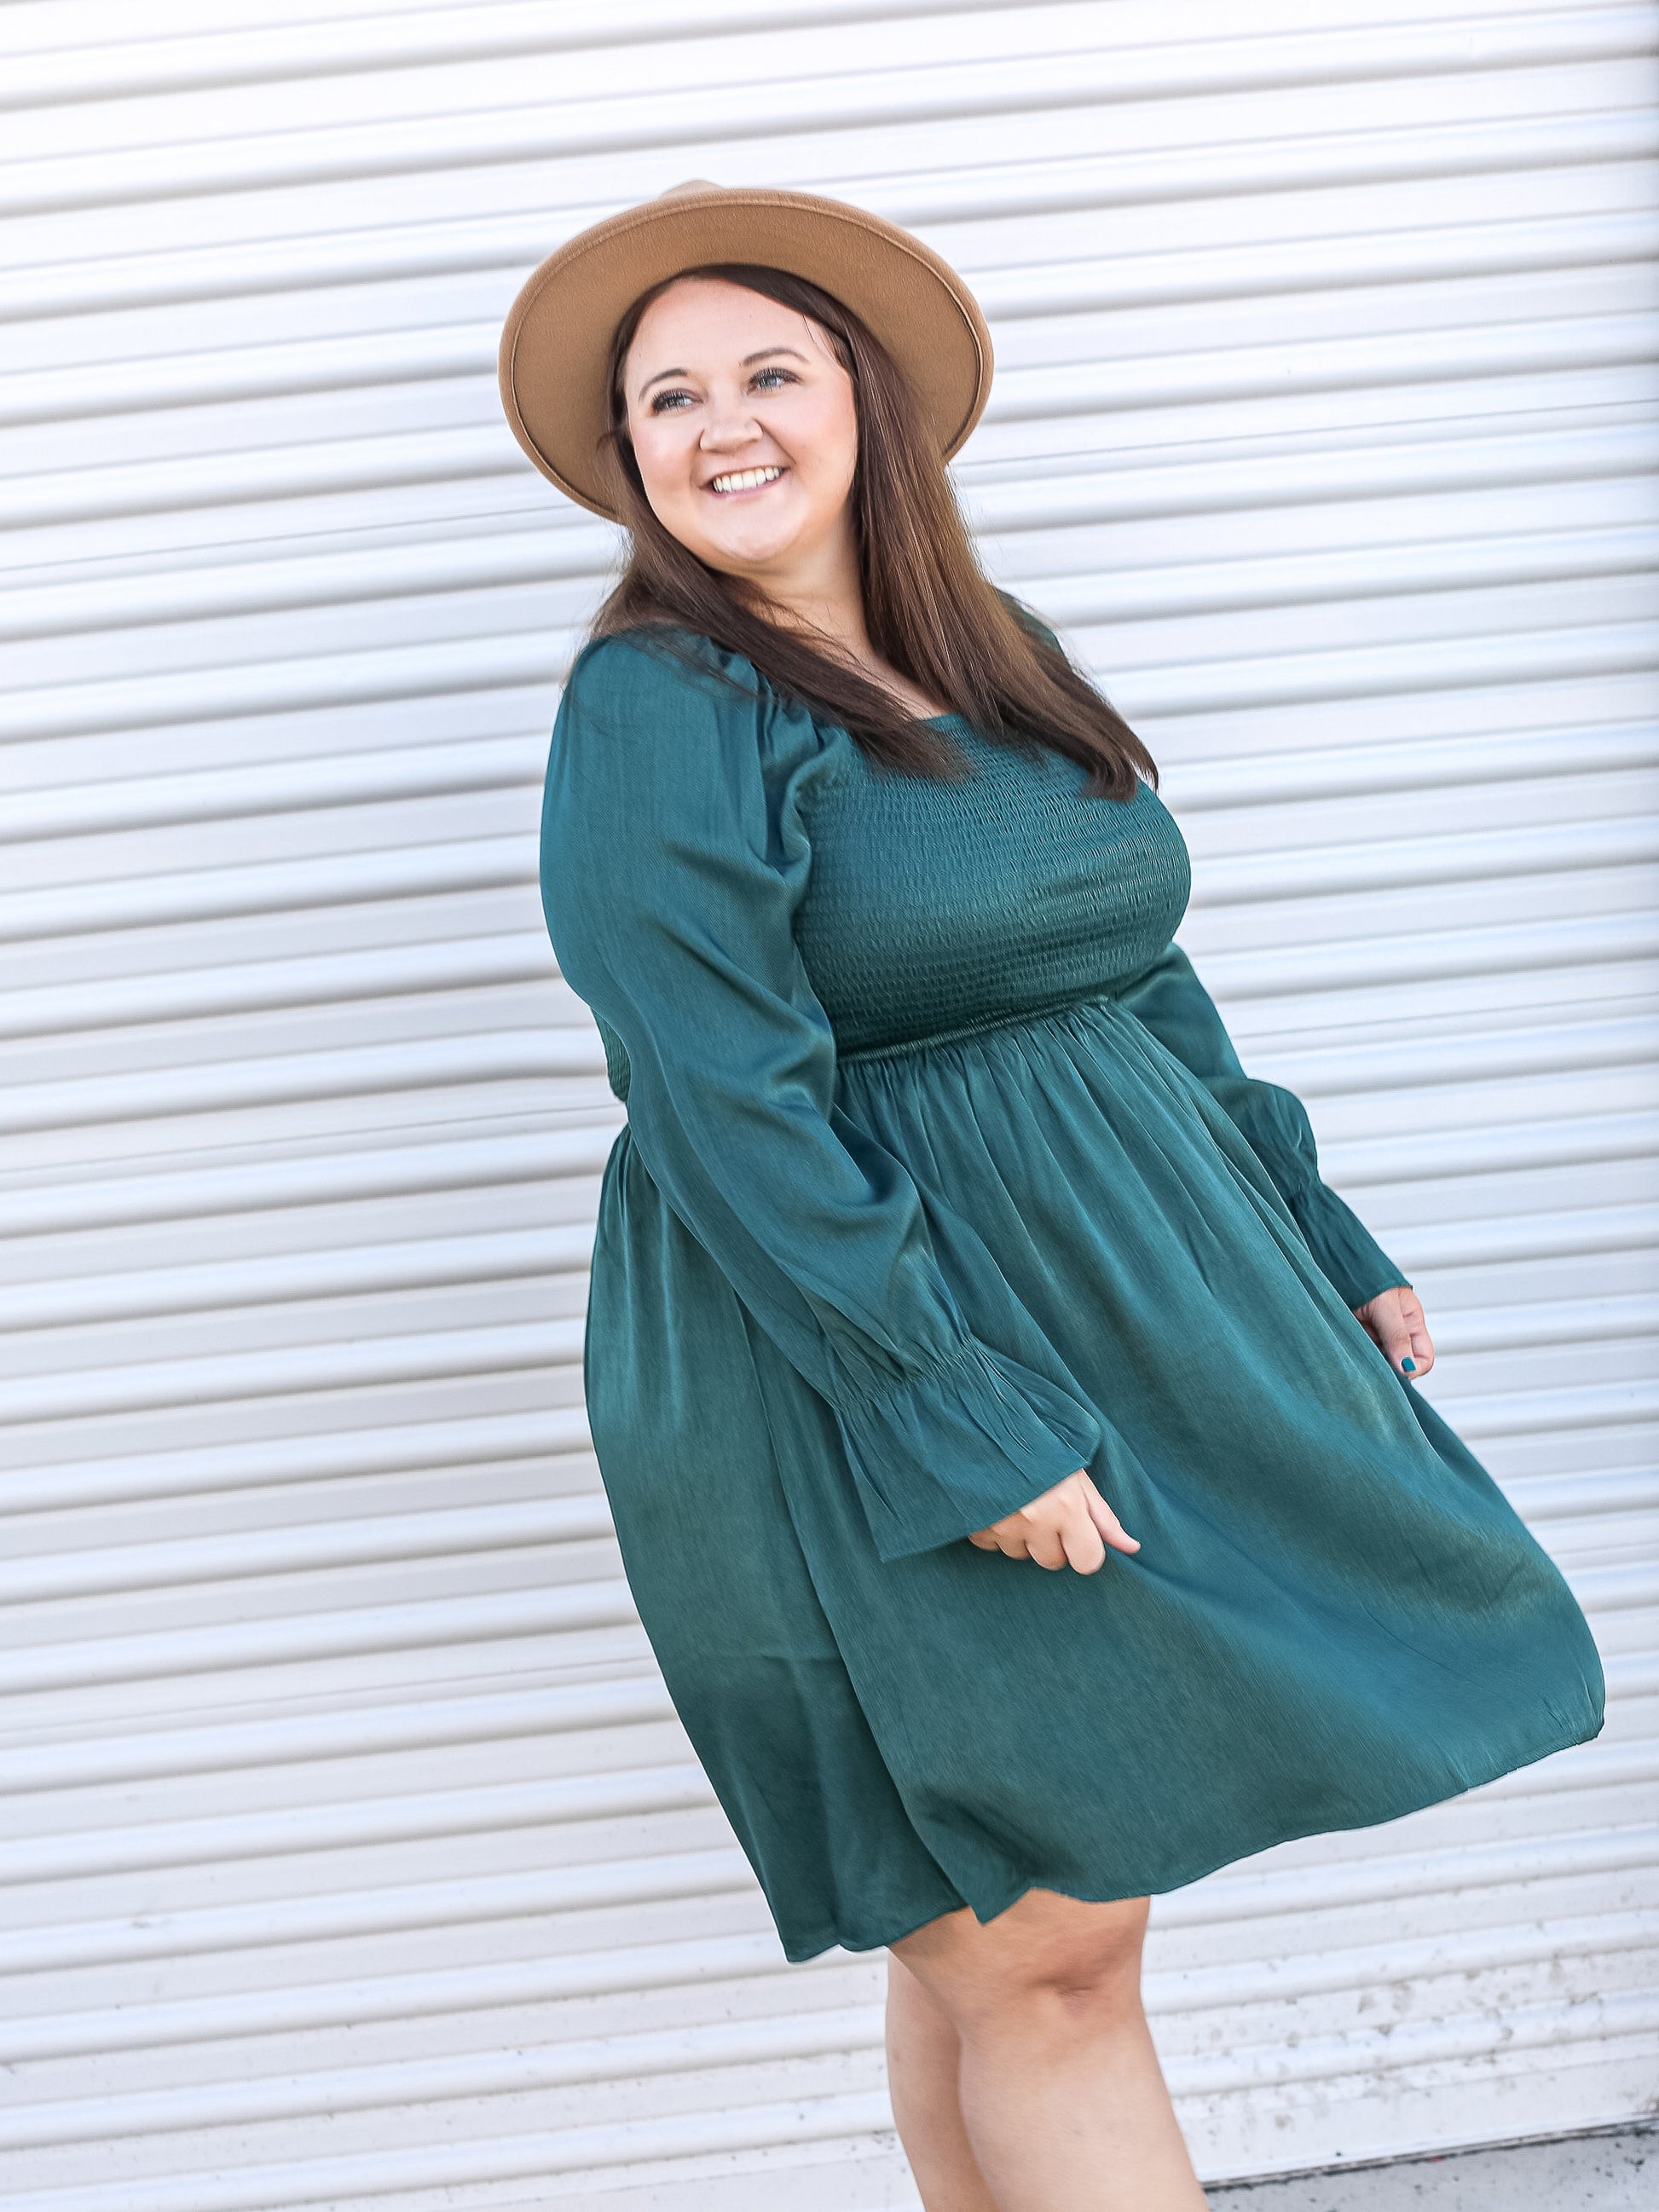 twirling in an emerald green dress styled with a wide brimmed hat.